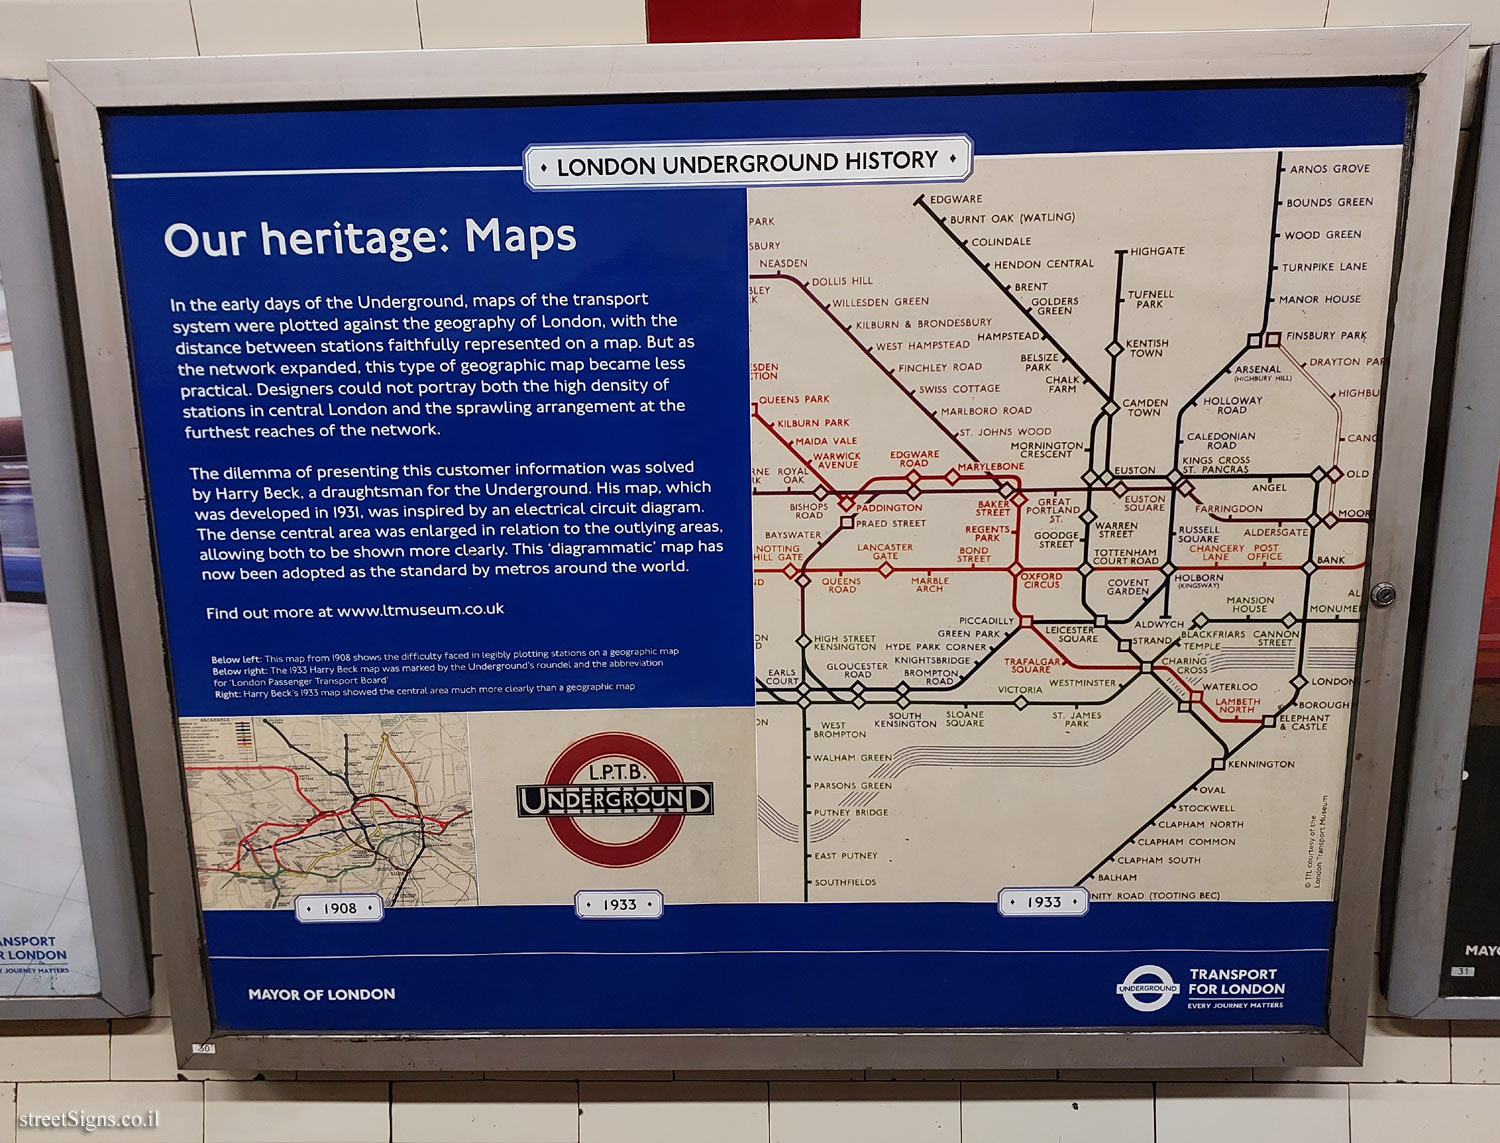 London -  London Underground History - Our heritage: Maps